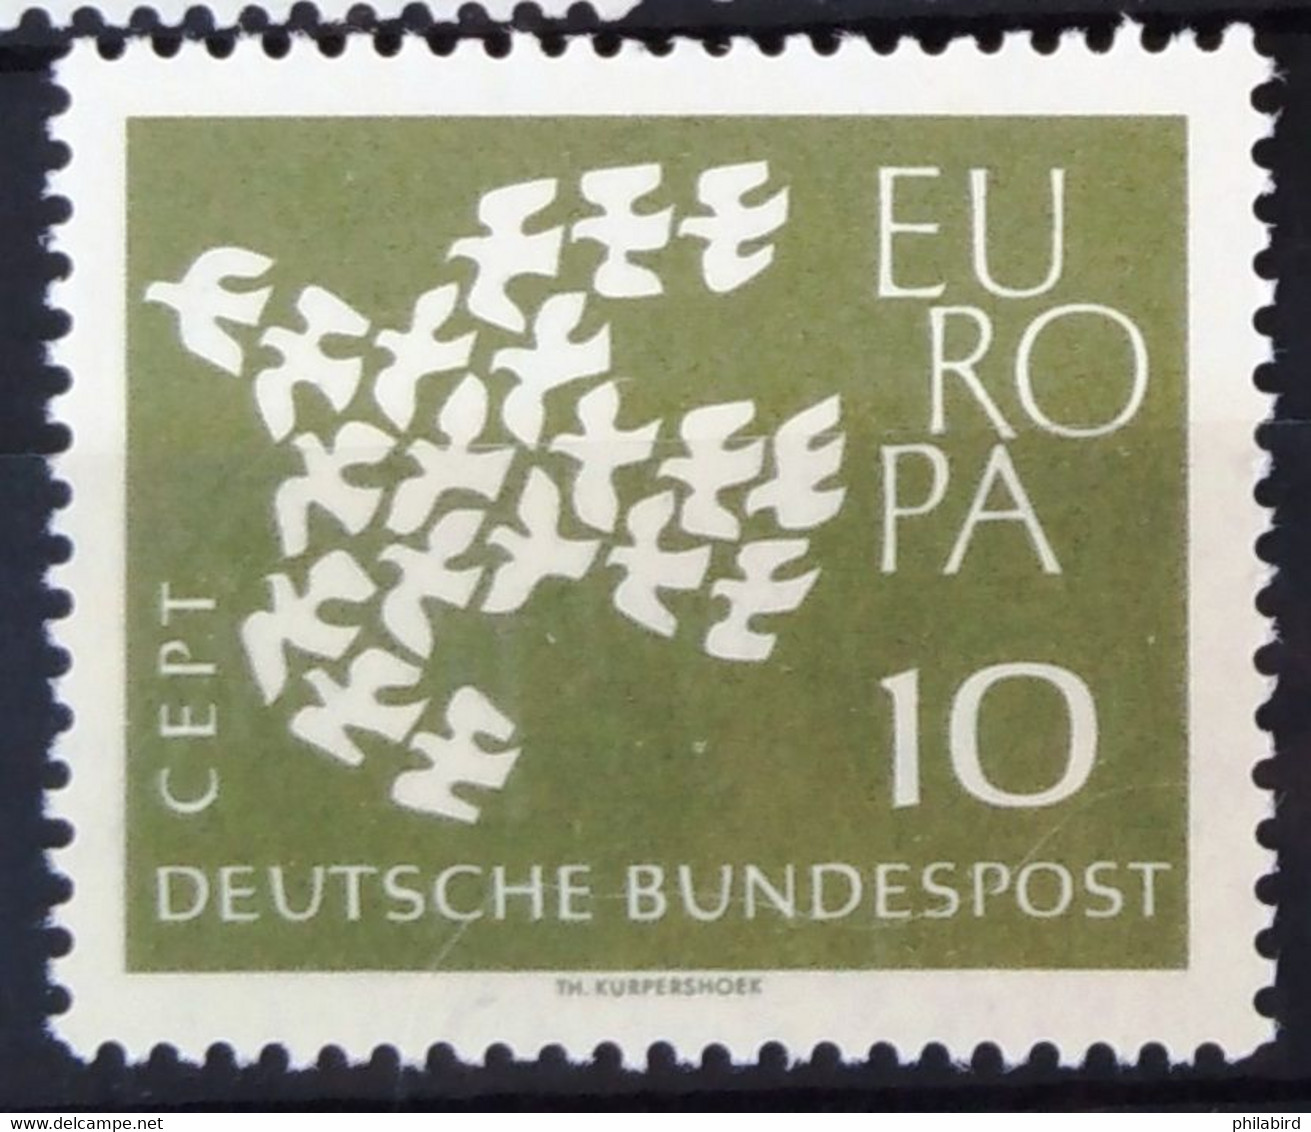 EUROPA 1961 - ALLEMAGNE                    N° 239a                    NEUF** - 1961